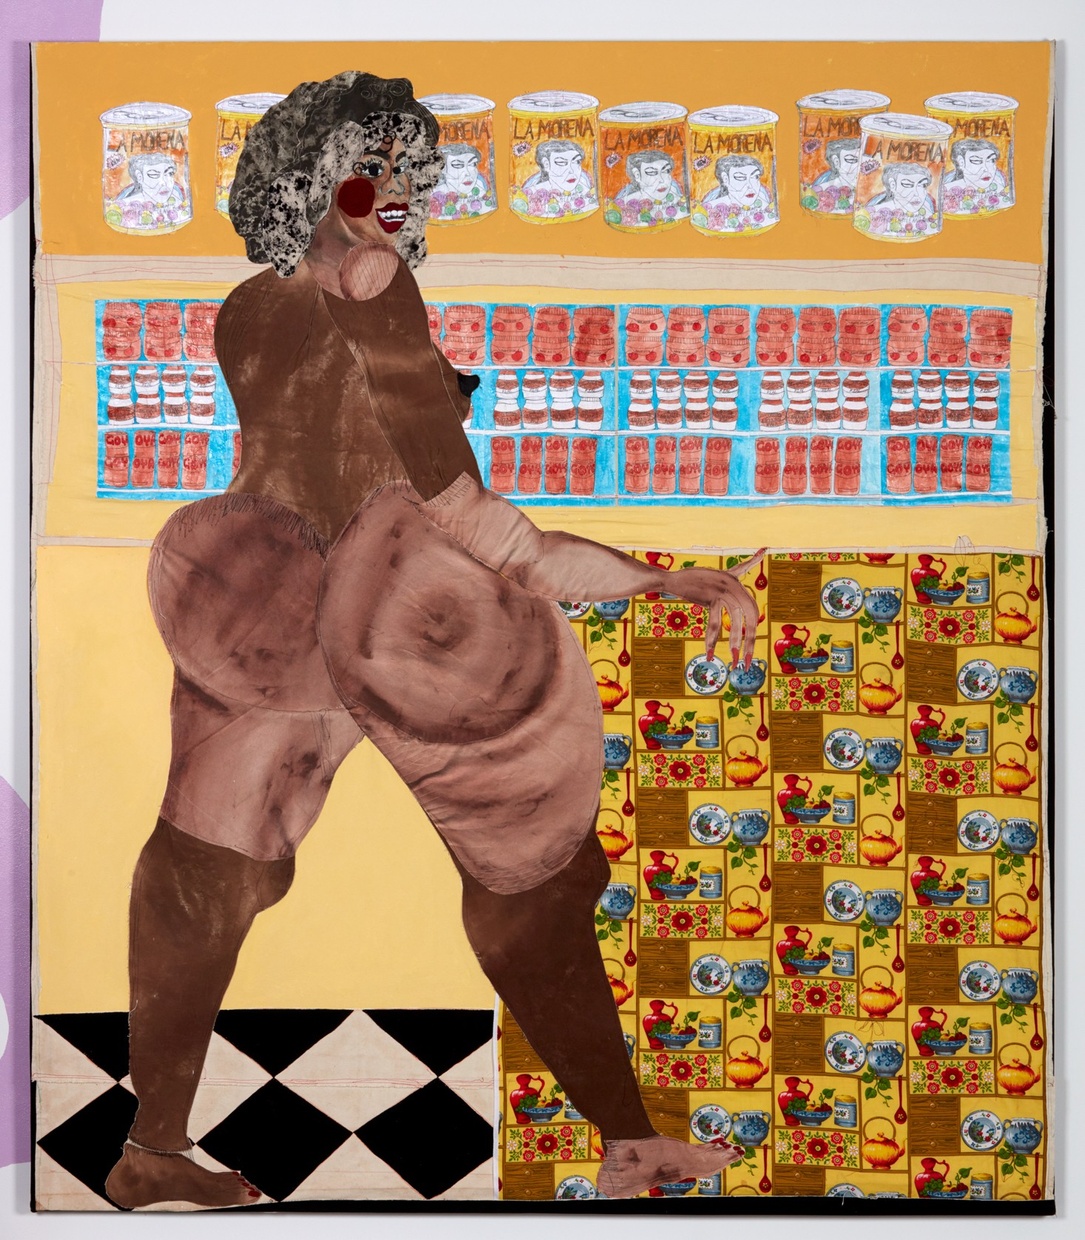 A large, voluptuous, nude, Black woman stands in a colorful room with a row of cans along the top, a row of jars along the middle, and a patterned square along the lower right side. 